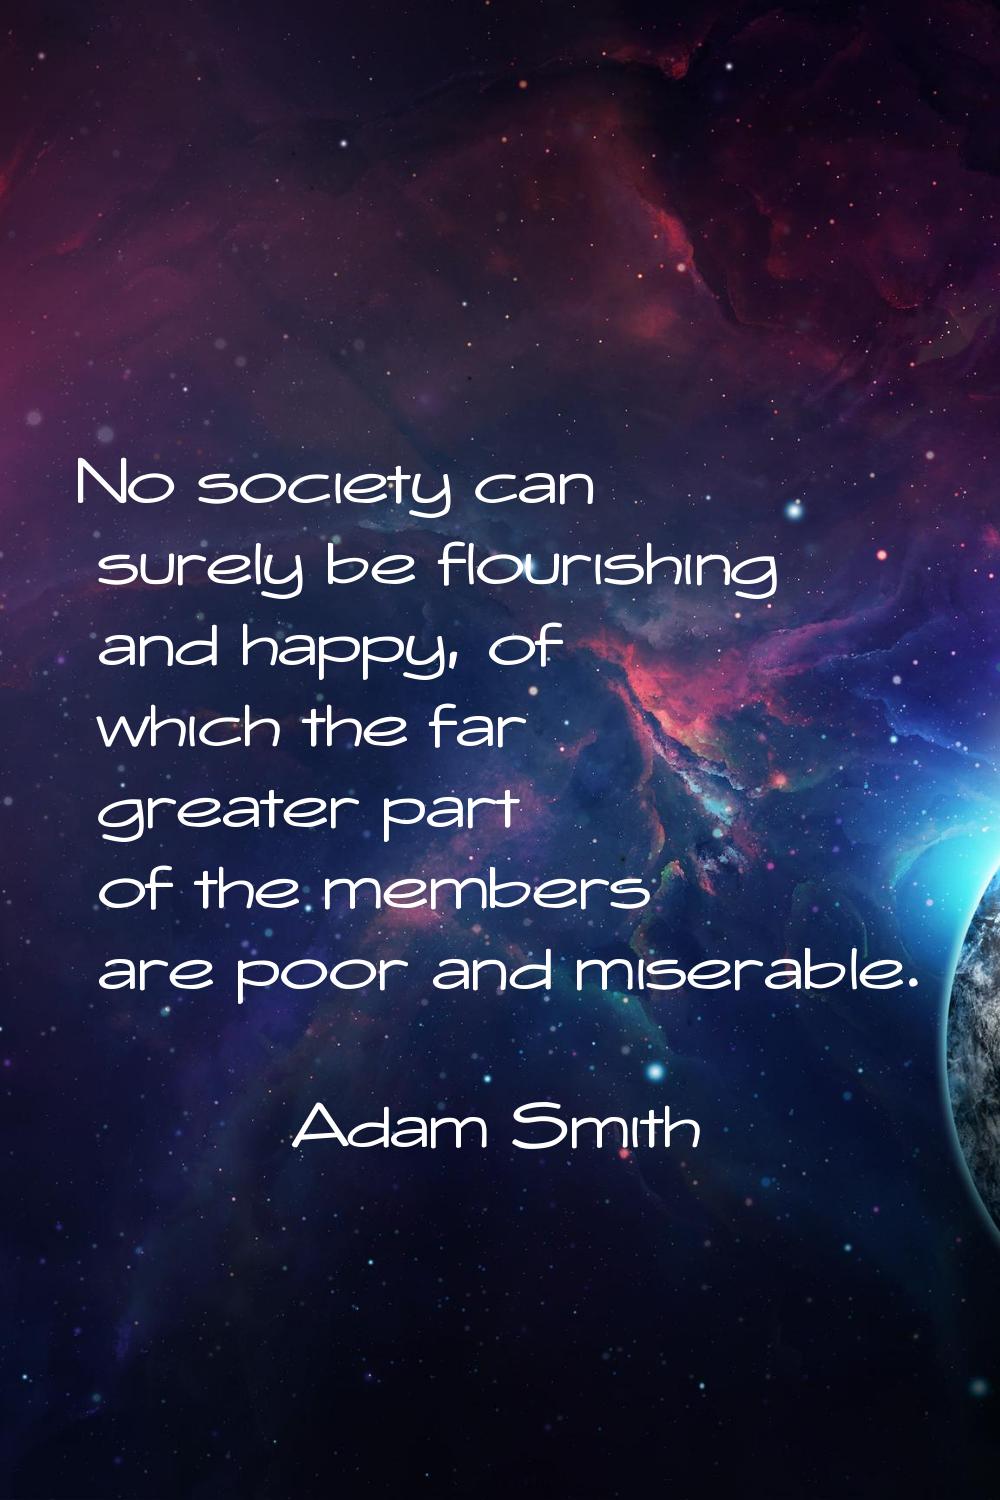 No society can surely be flourishing and happy, of which the far greater part of the members are po